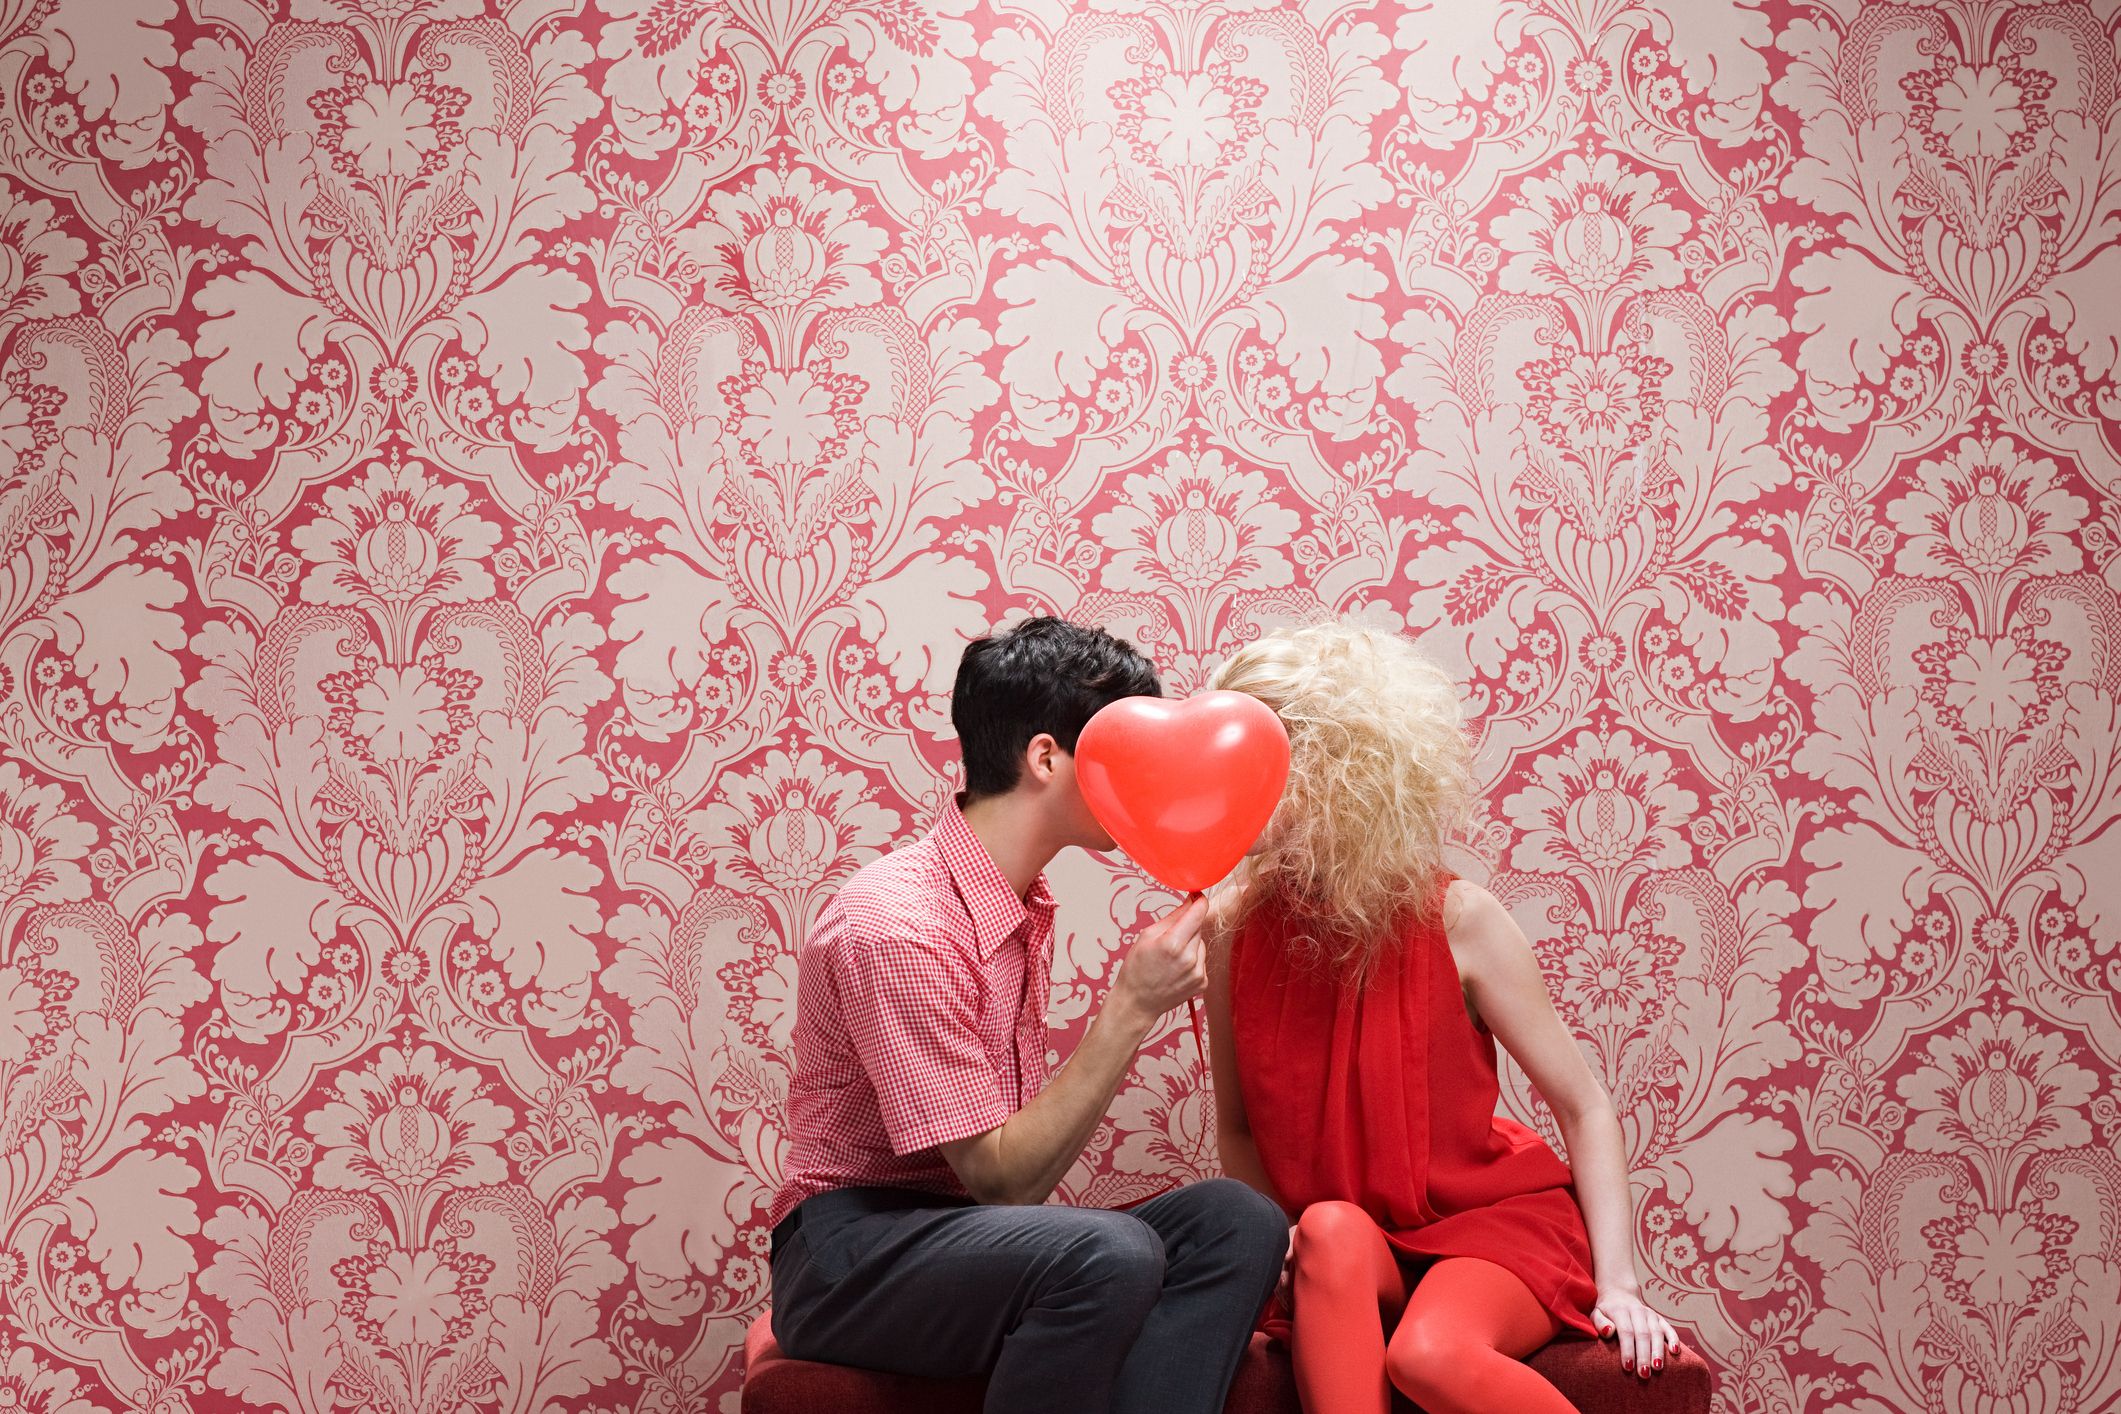 50 Cheap (or Free!) Date Ideas for Valentines